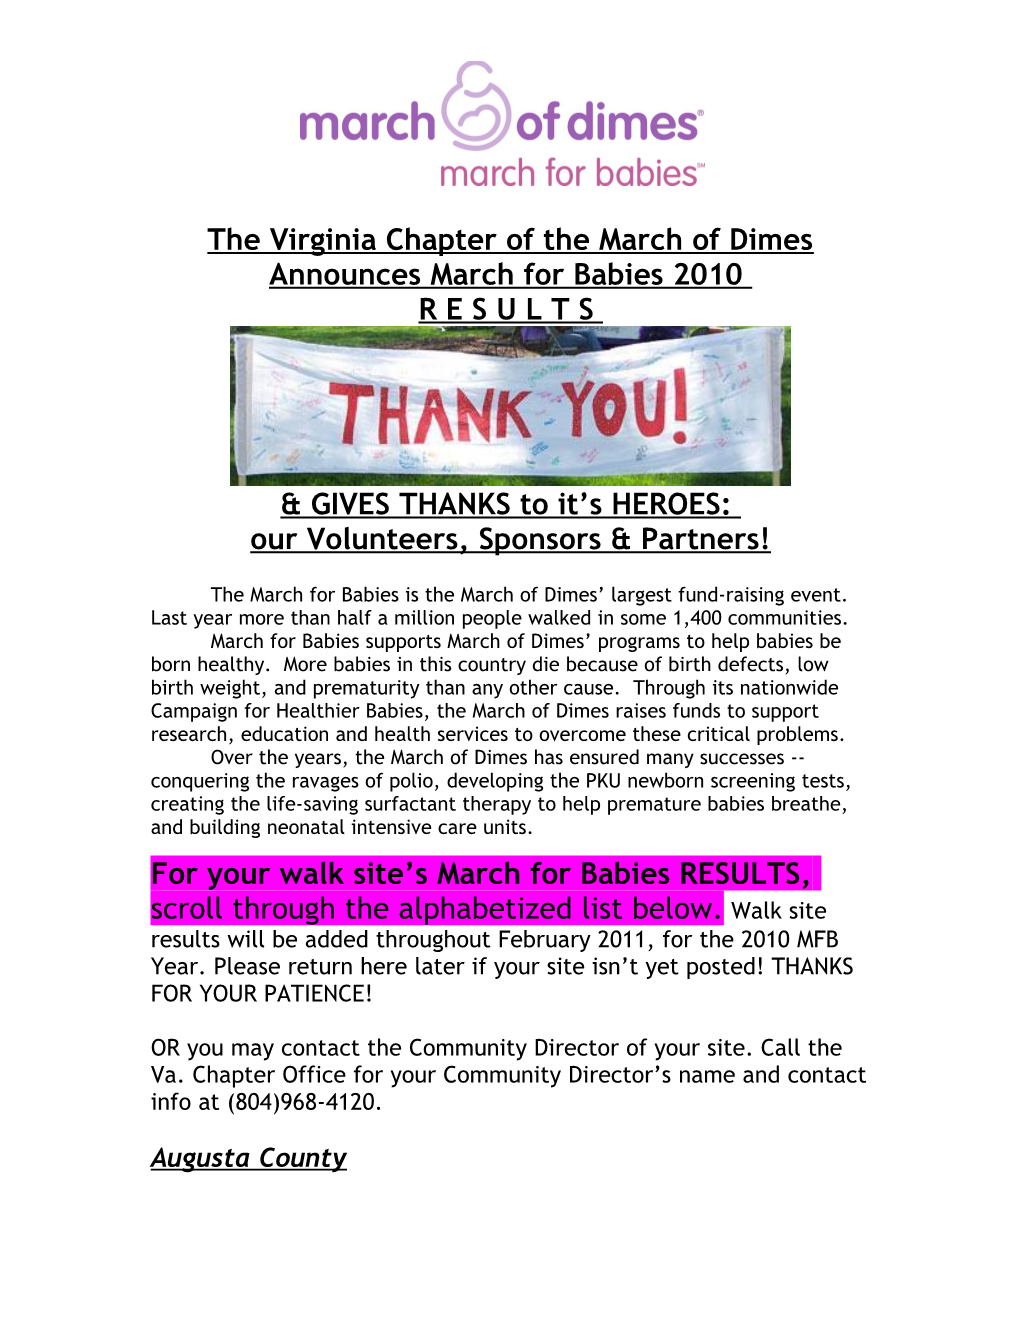 The Virginia Chapter of the March of Dimes Announces March for Babies 2010